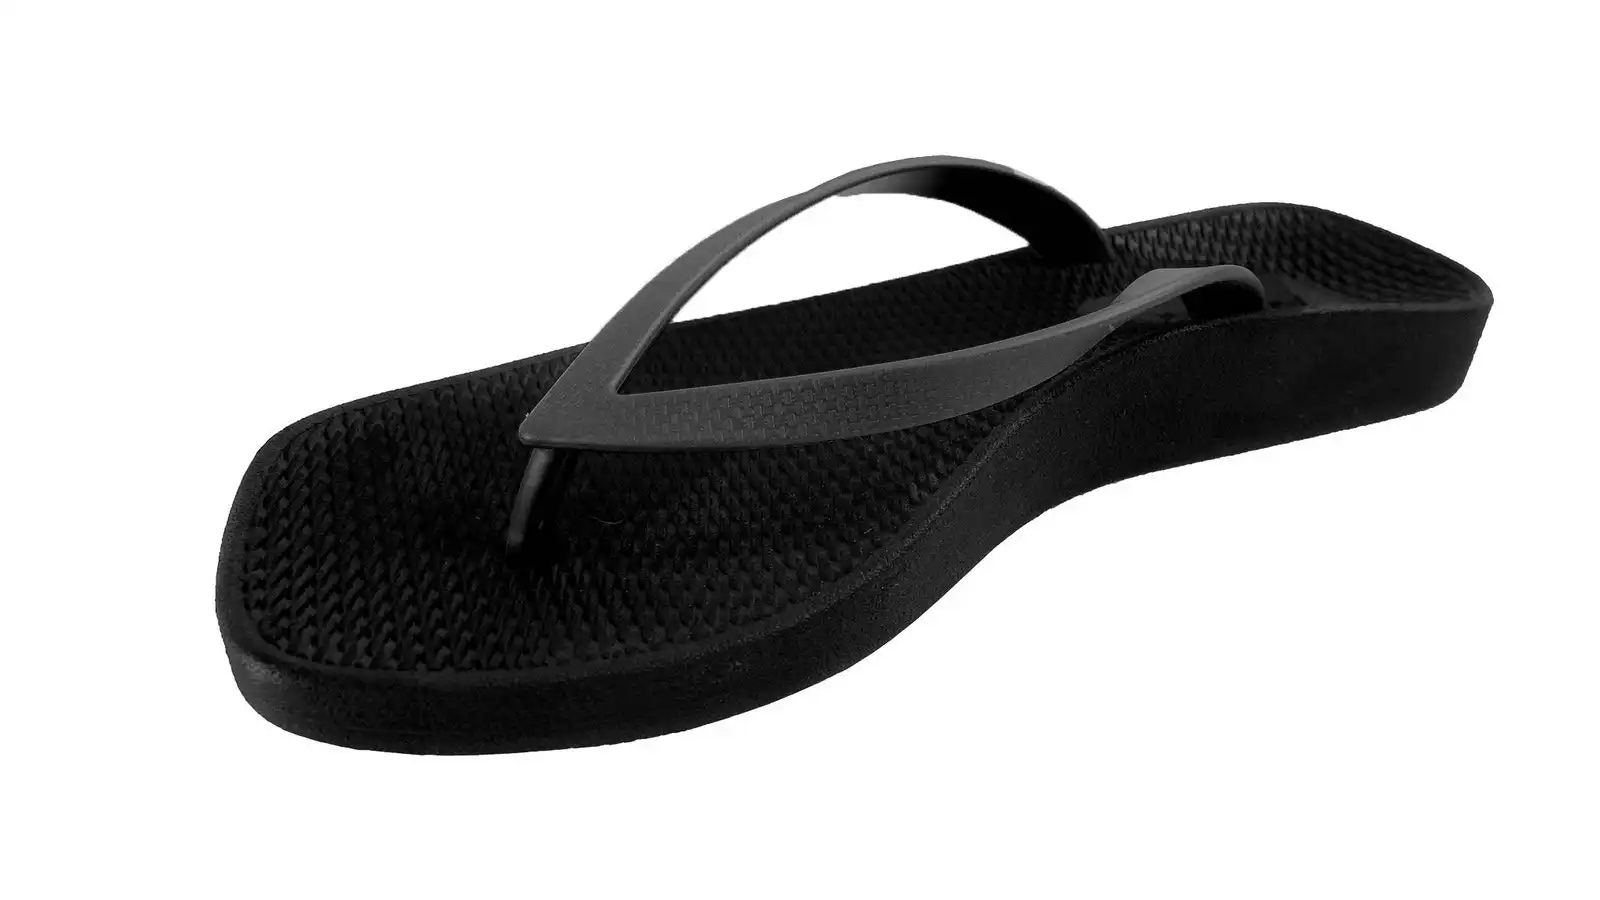 Archline Breeze Arch Support Orthotic Thongs Flip Flops Arch Support - Black